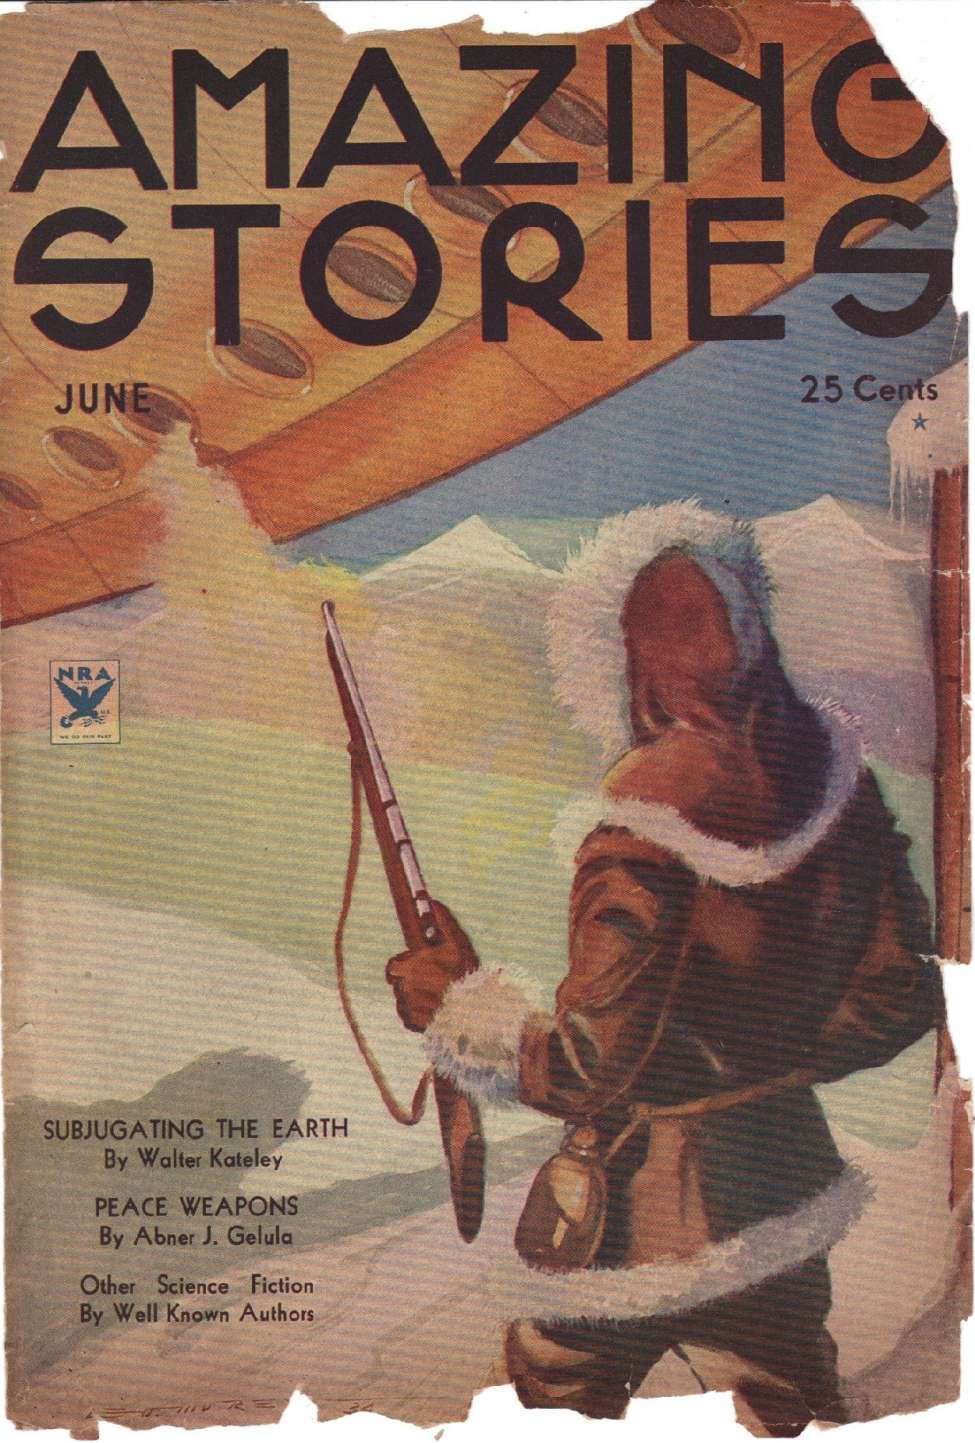 Book Cover For Amazing Stories v9 2 - Subjugating the Earth - Walter Kateley